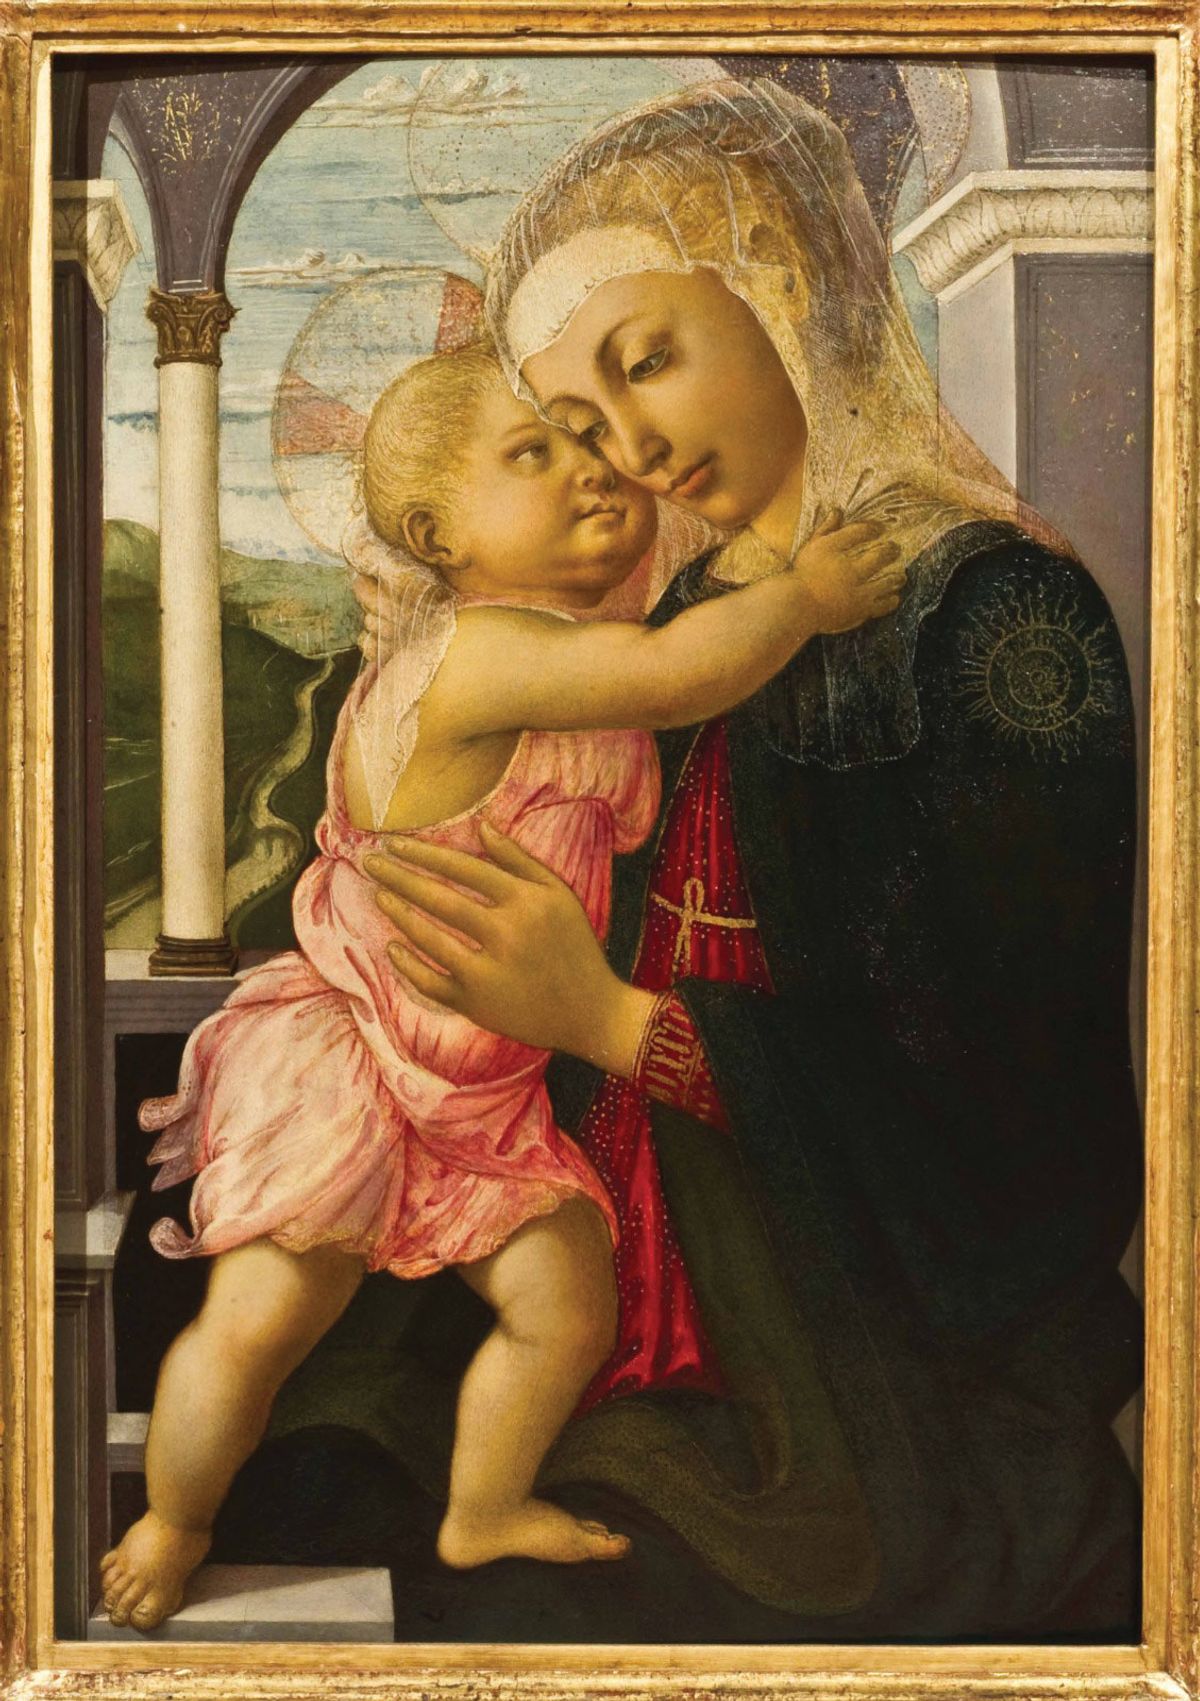 Could Sandro Botticelli’s Madonna della Loggia, which is currently on loan in Russia, be among the Uffizi works travelling to Hong Kong in 2020? Gallerie degli Uffizi